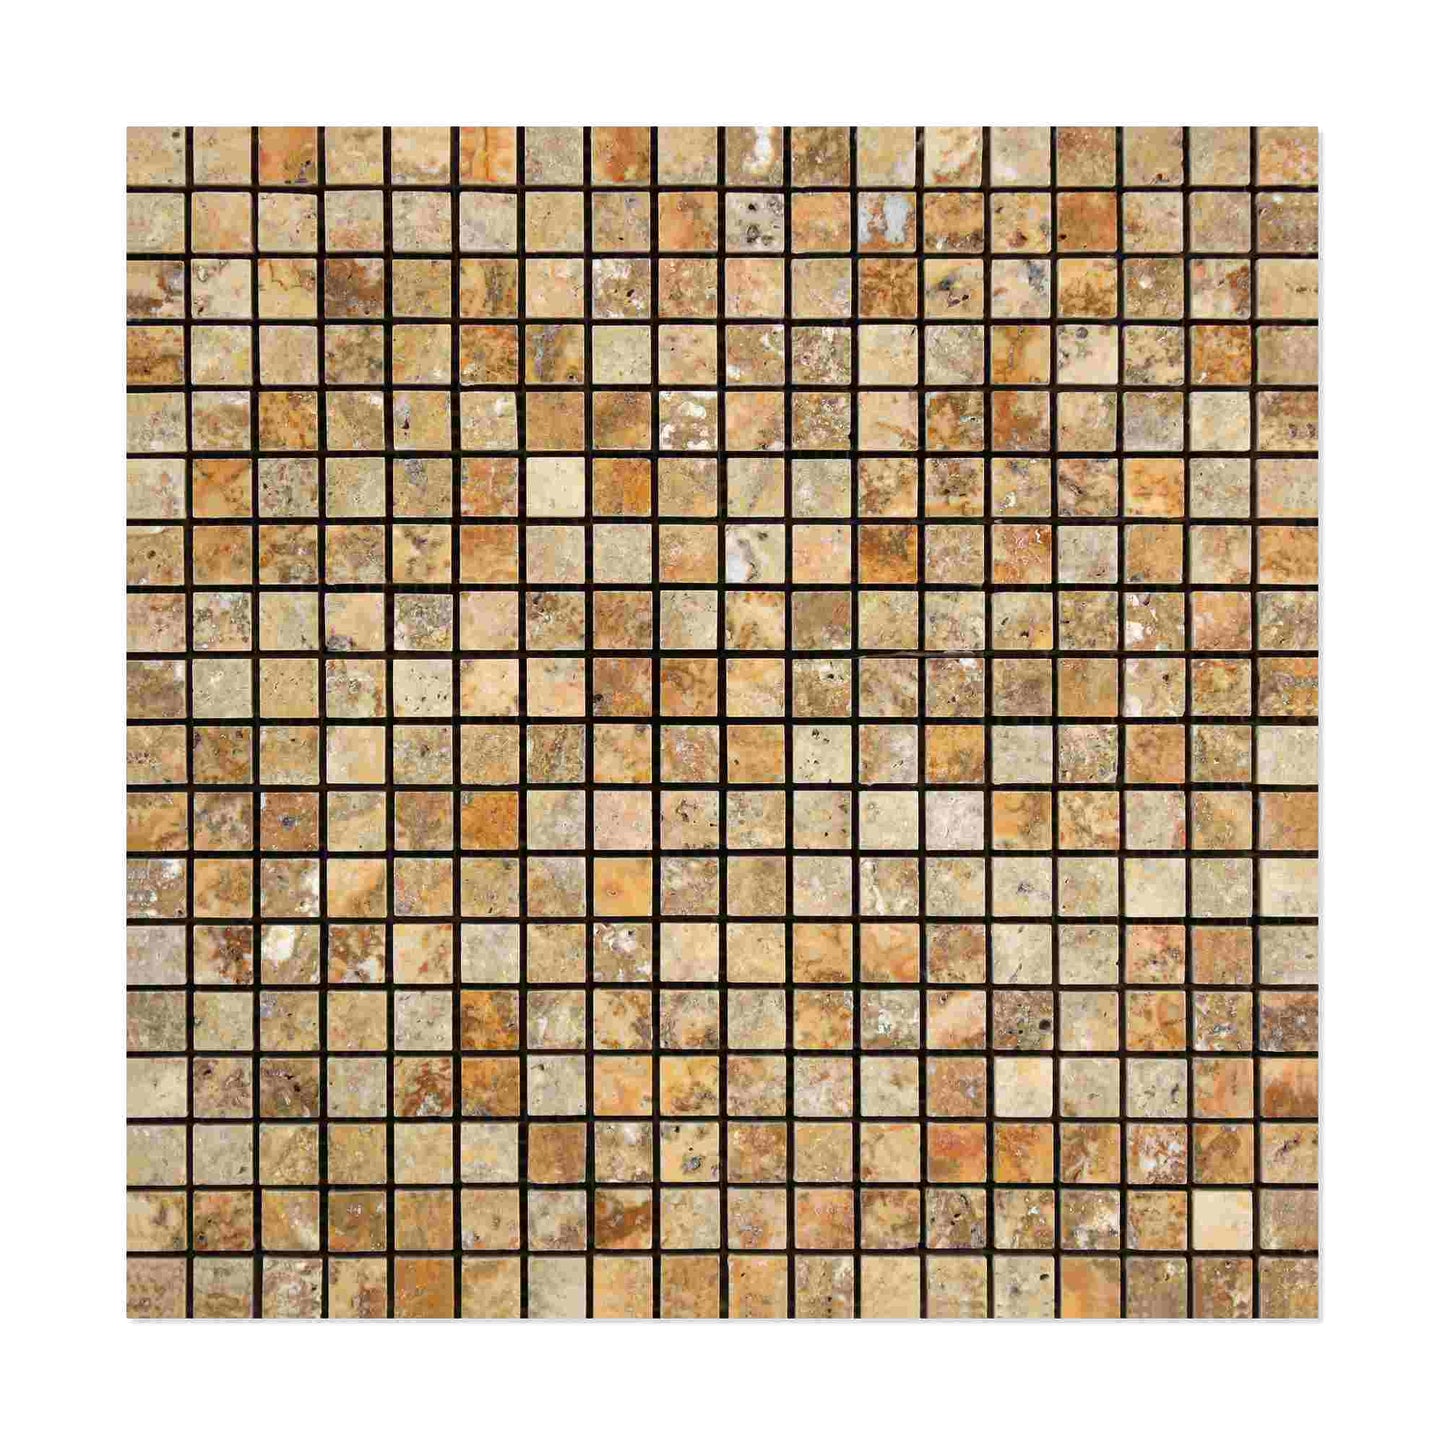 Scabos Travertine Square Mosaic Tile 5/8x5/8"